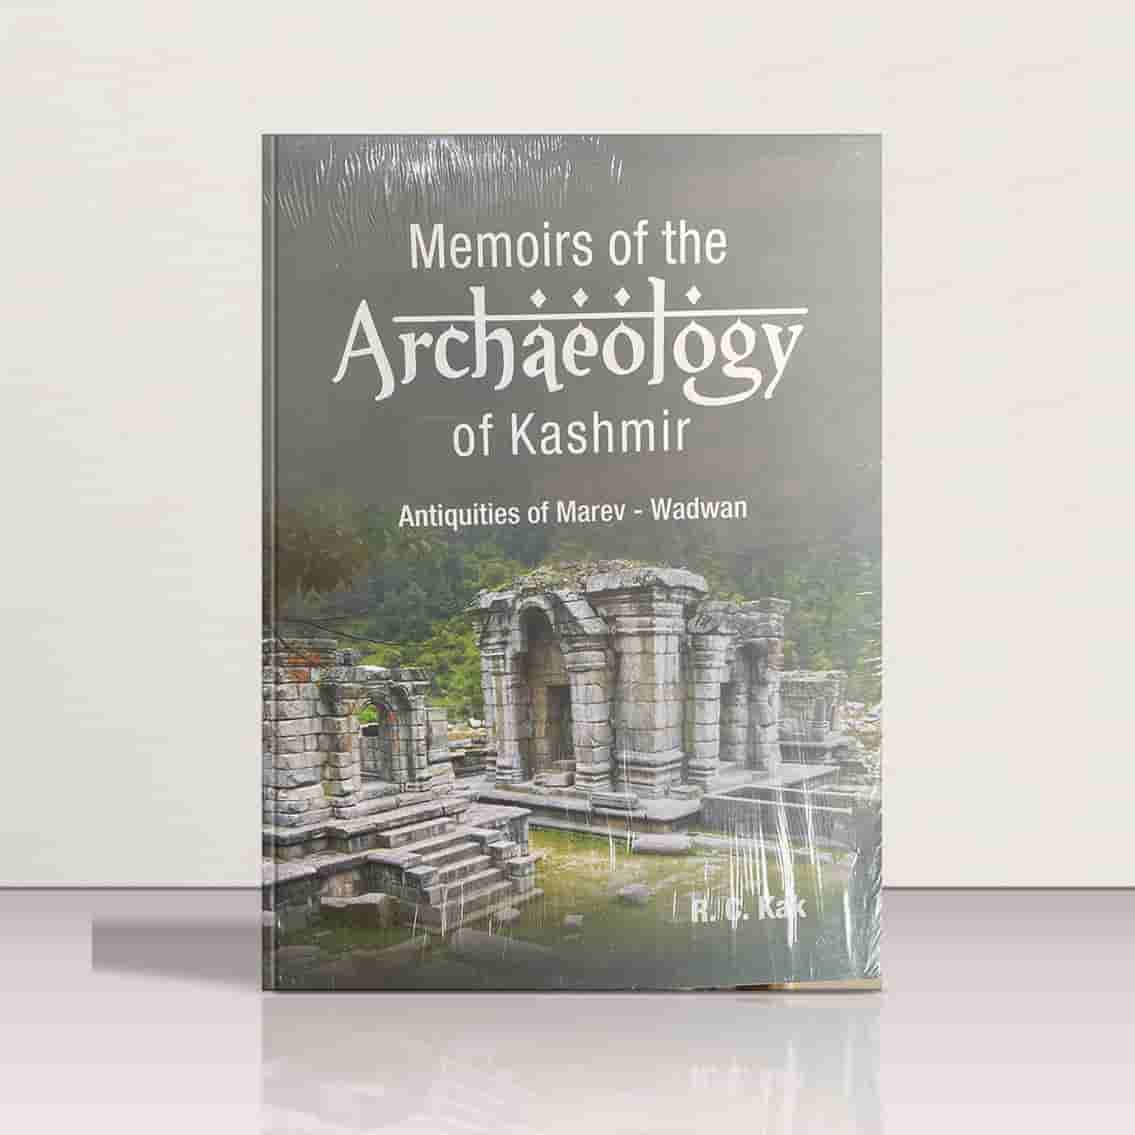 Memoirs of the Archaeology of Kashmir